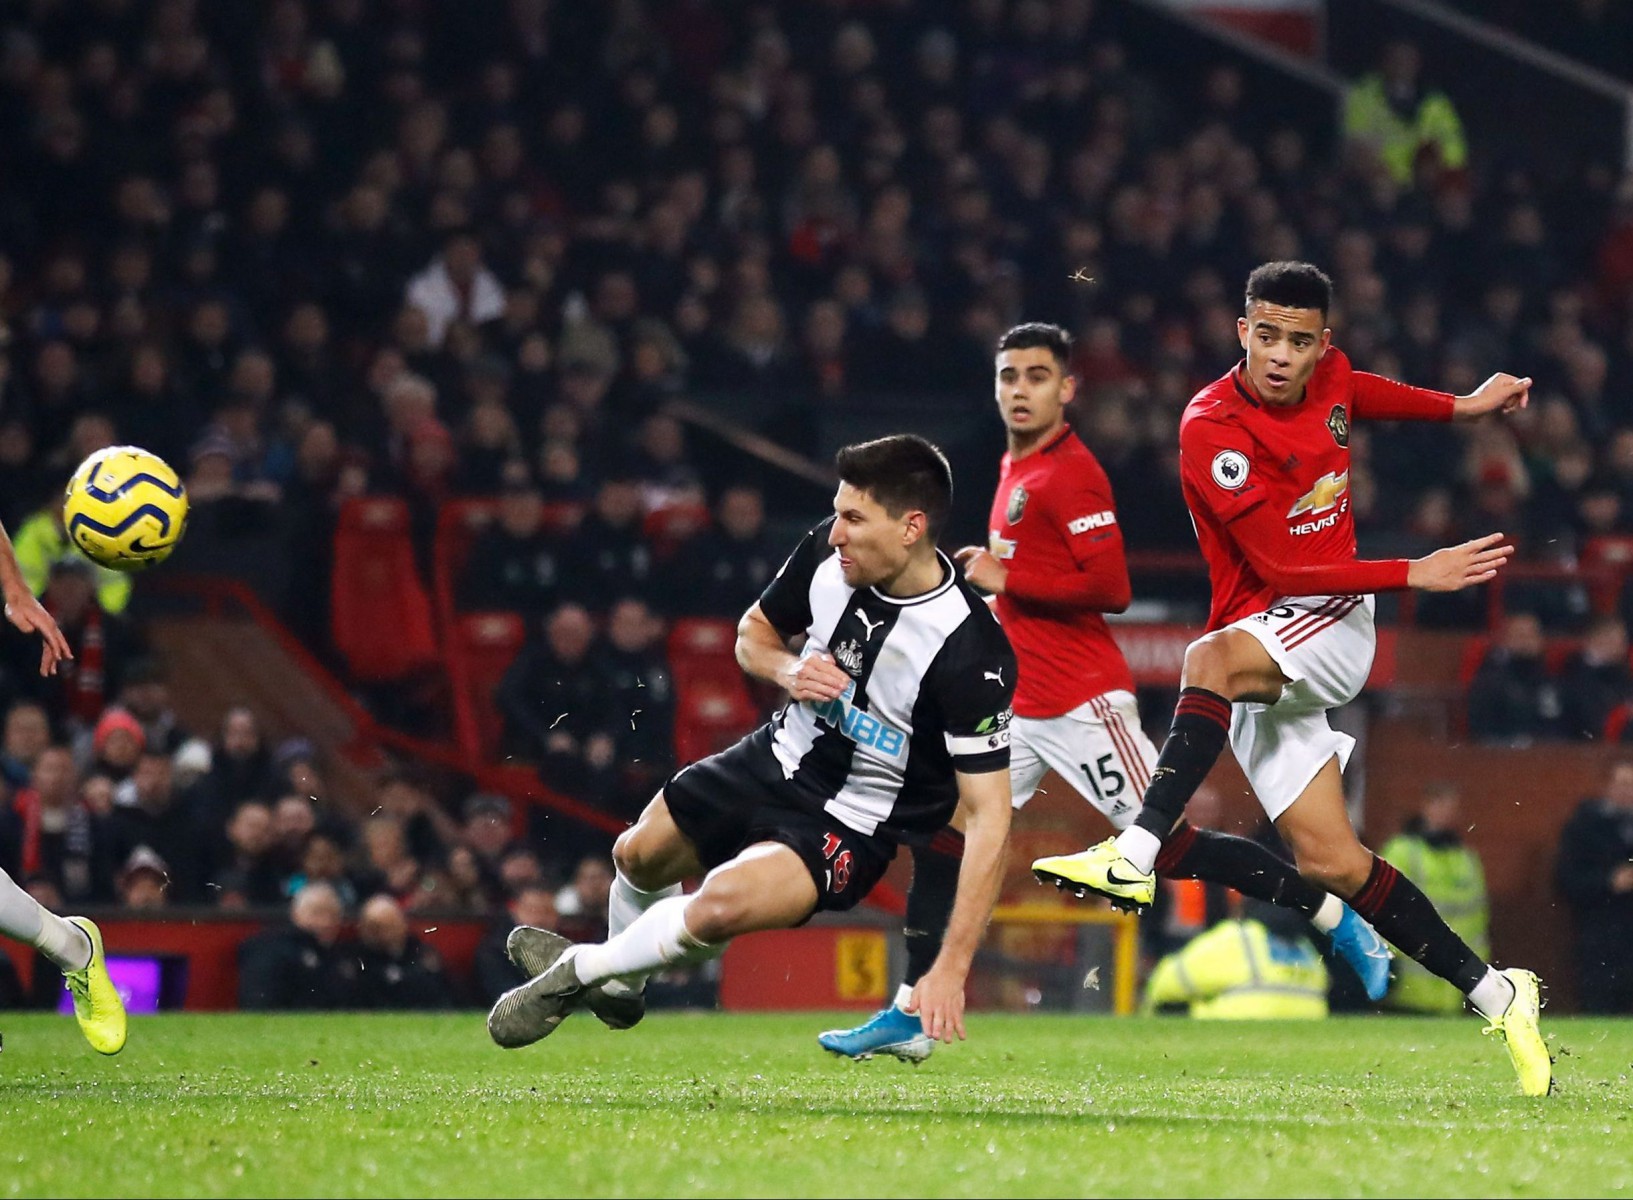 Mason Greenwood has announced himself onto the Old Trafford stage